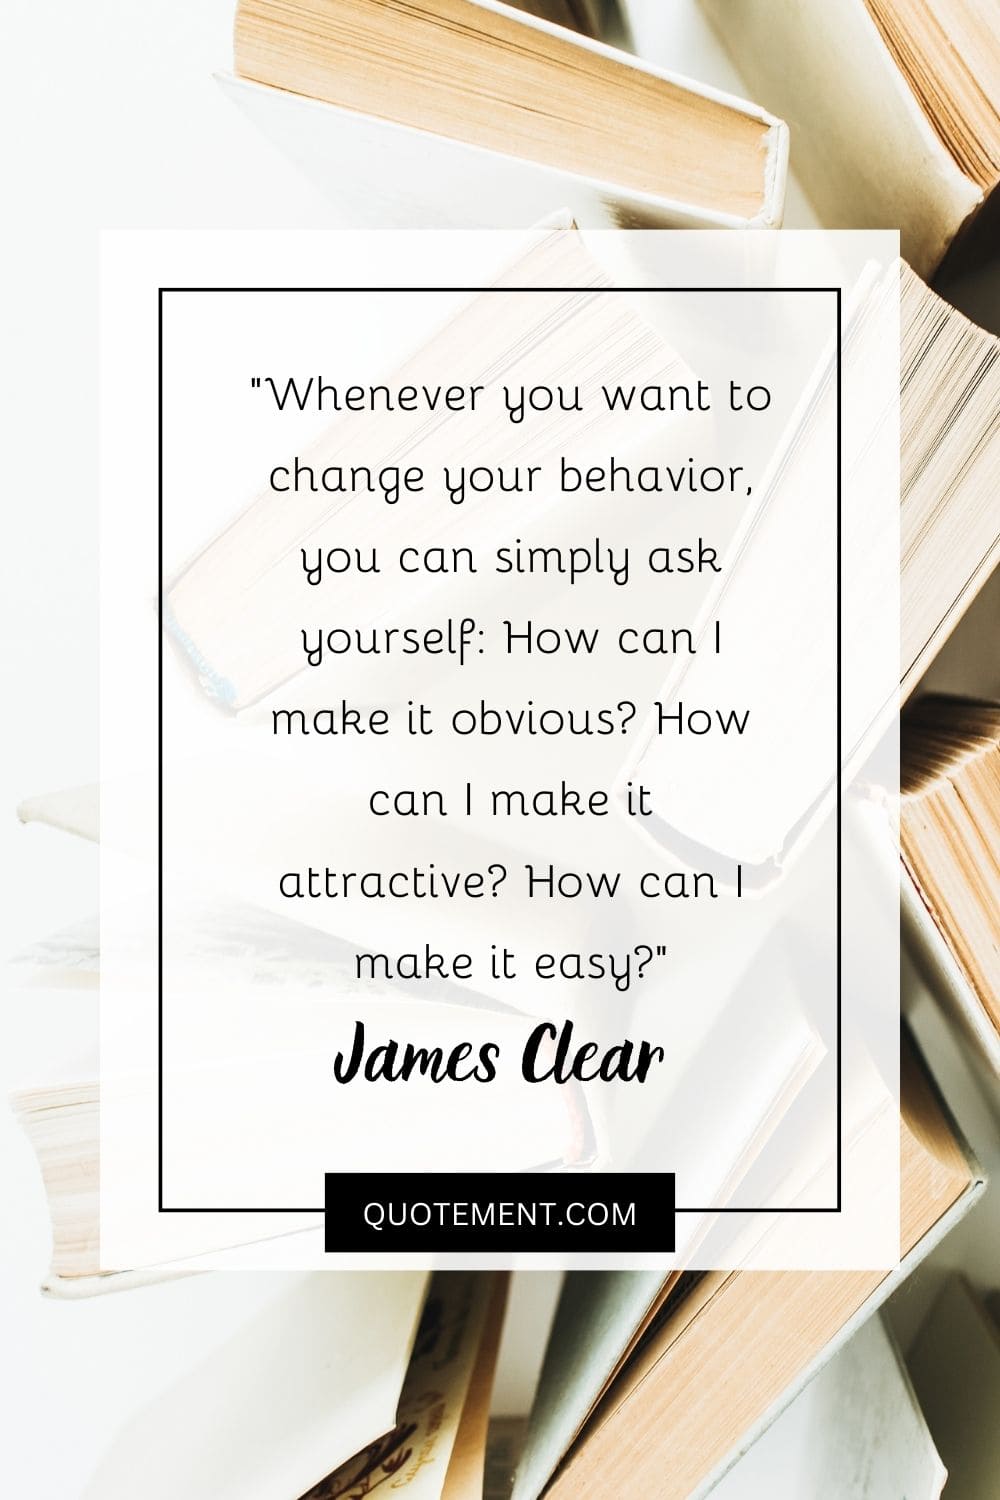 Whenever you want to change your behavior, you can simply ask yourself How can I make it obvious